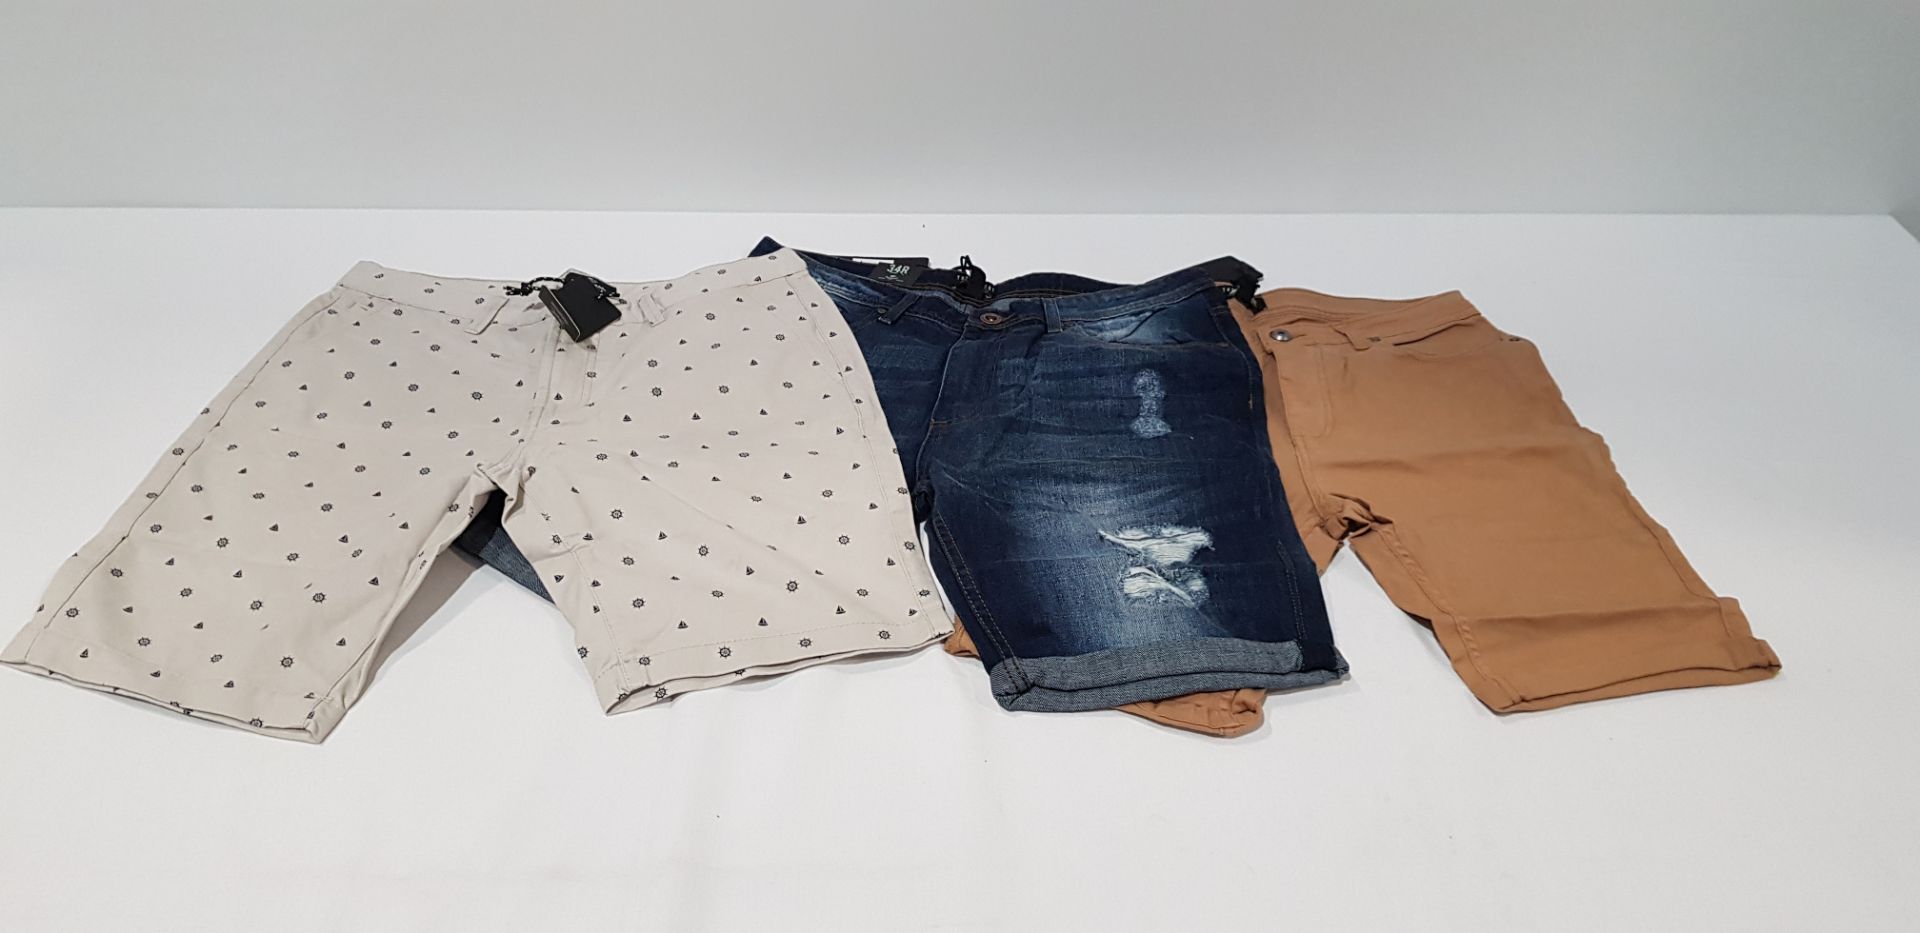 10 X MIXED THREADBARE DENIM SHORTS IN MIXED SIZES AND STYLES (RRP £34.99 EACH TOTAL £350) IN ONE